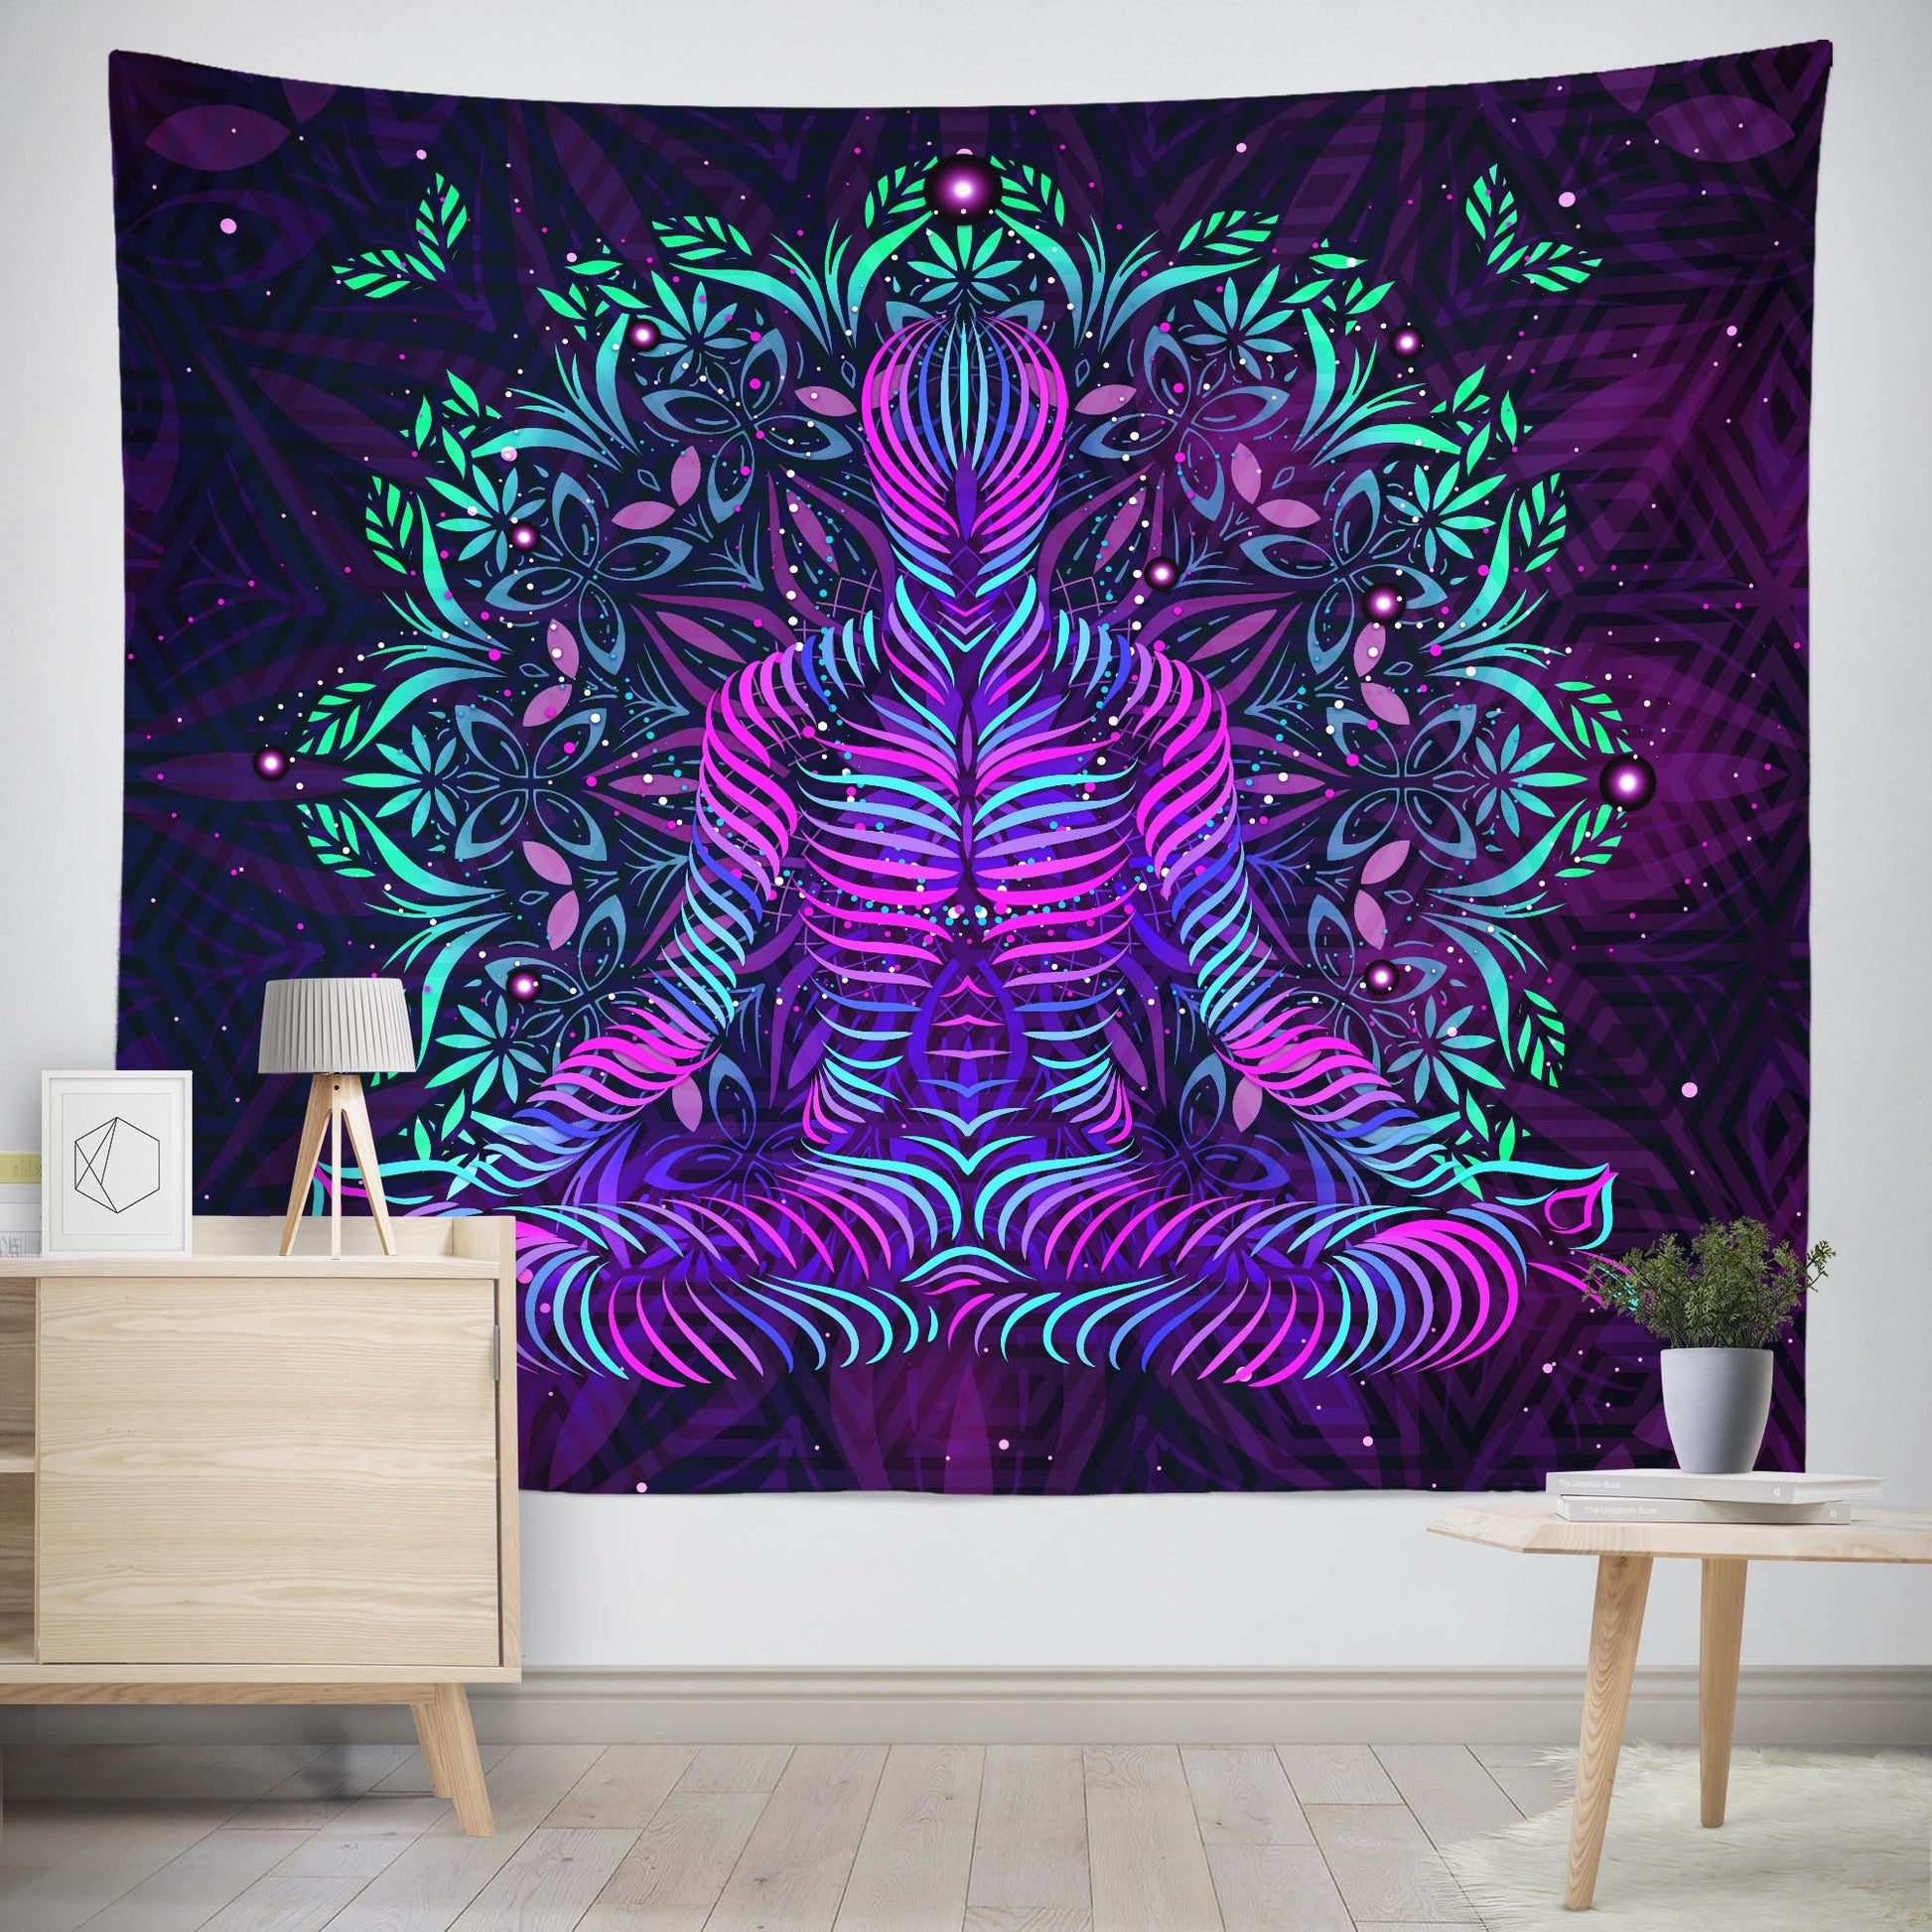 Extra large trippy psychedelic wall tapestry